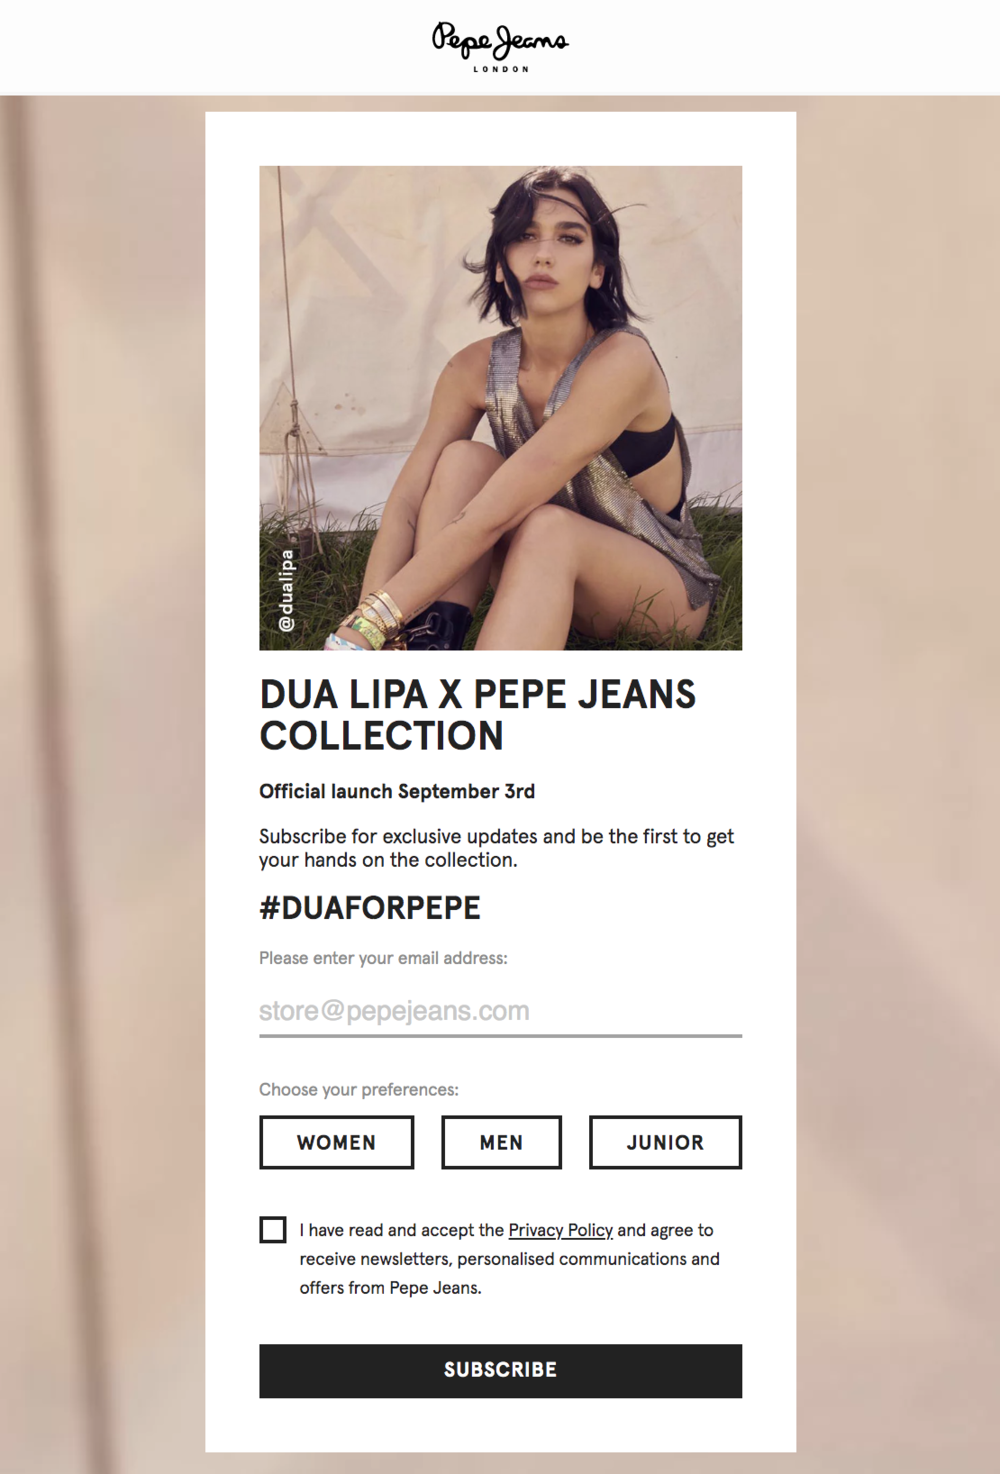 Pepe Jeans London (@PepeJeans) / X